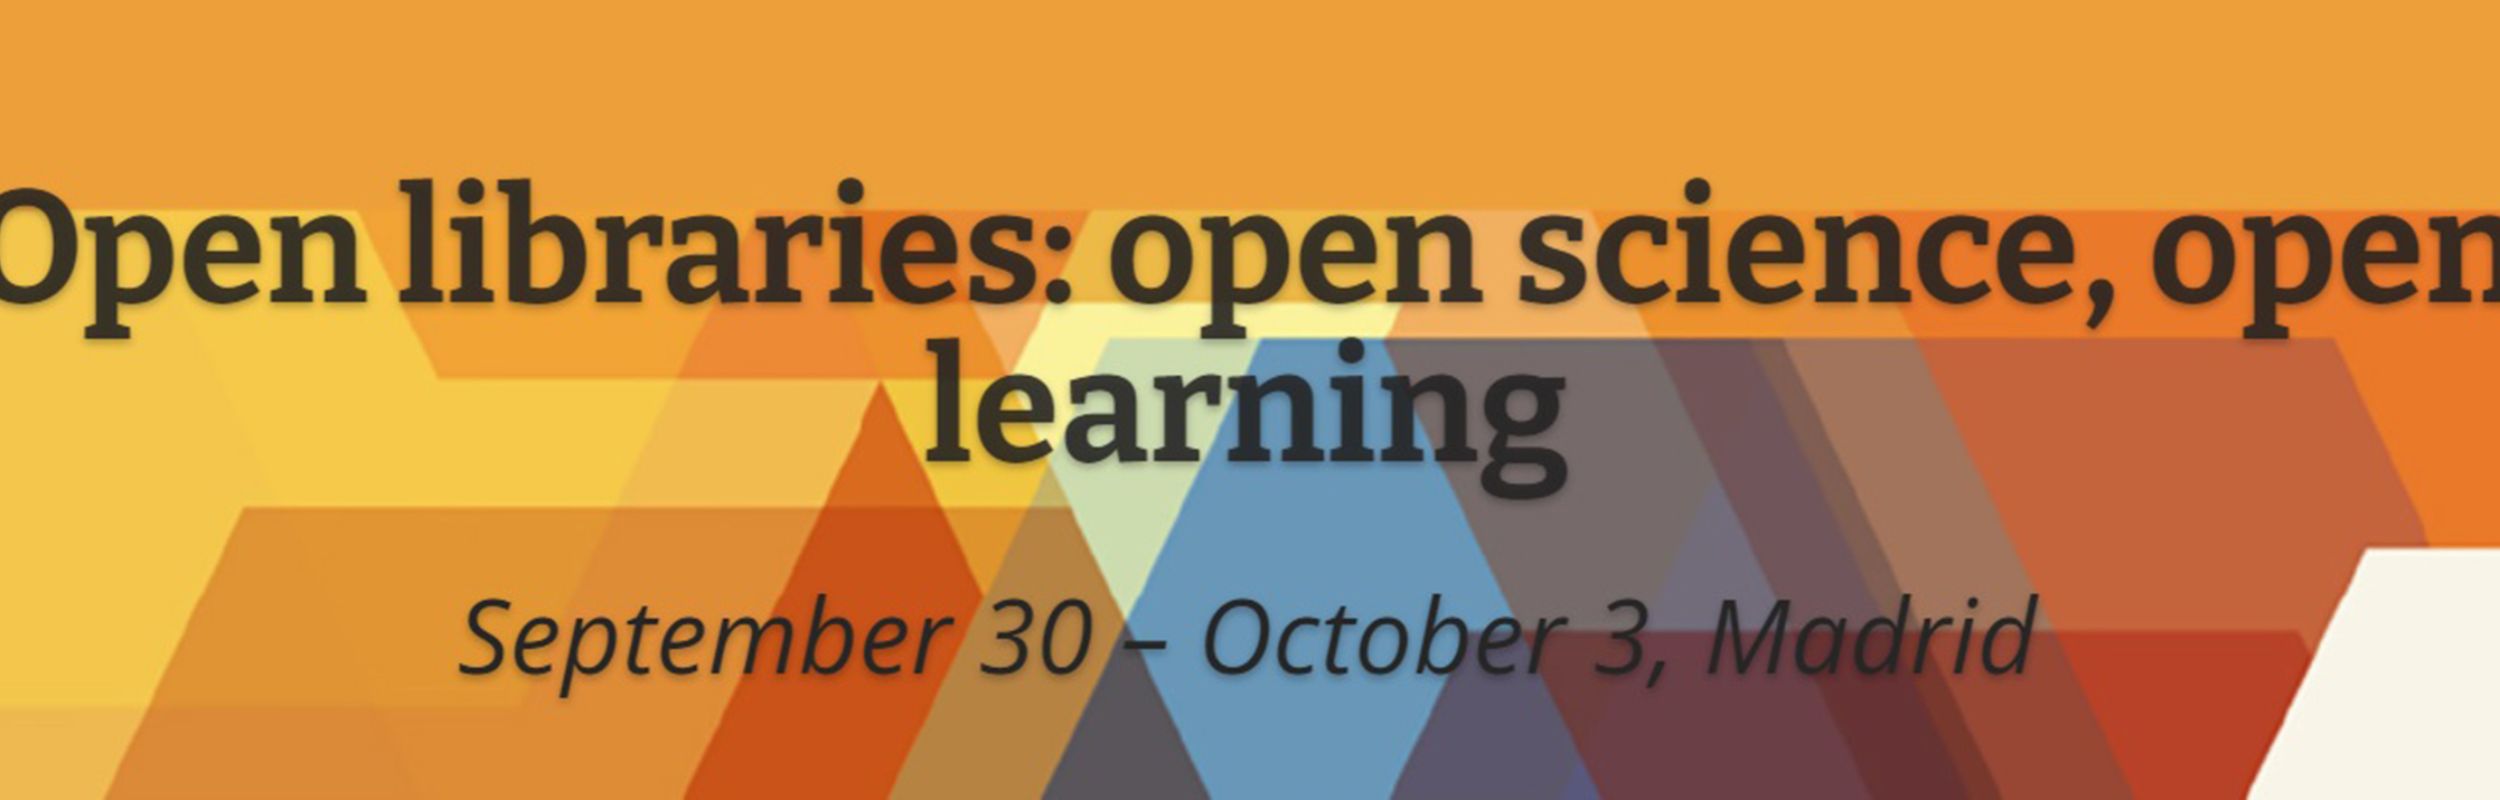 Congreso Open libraries: open science, open learning